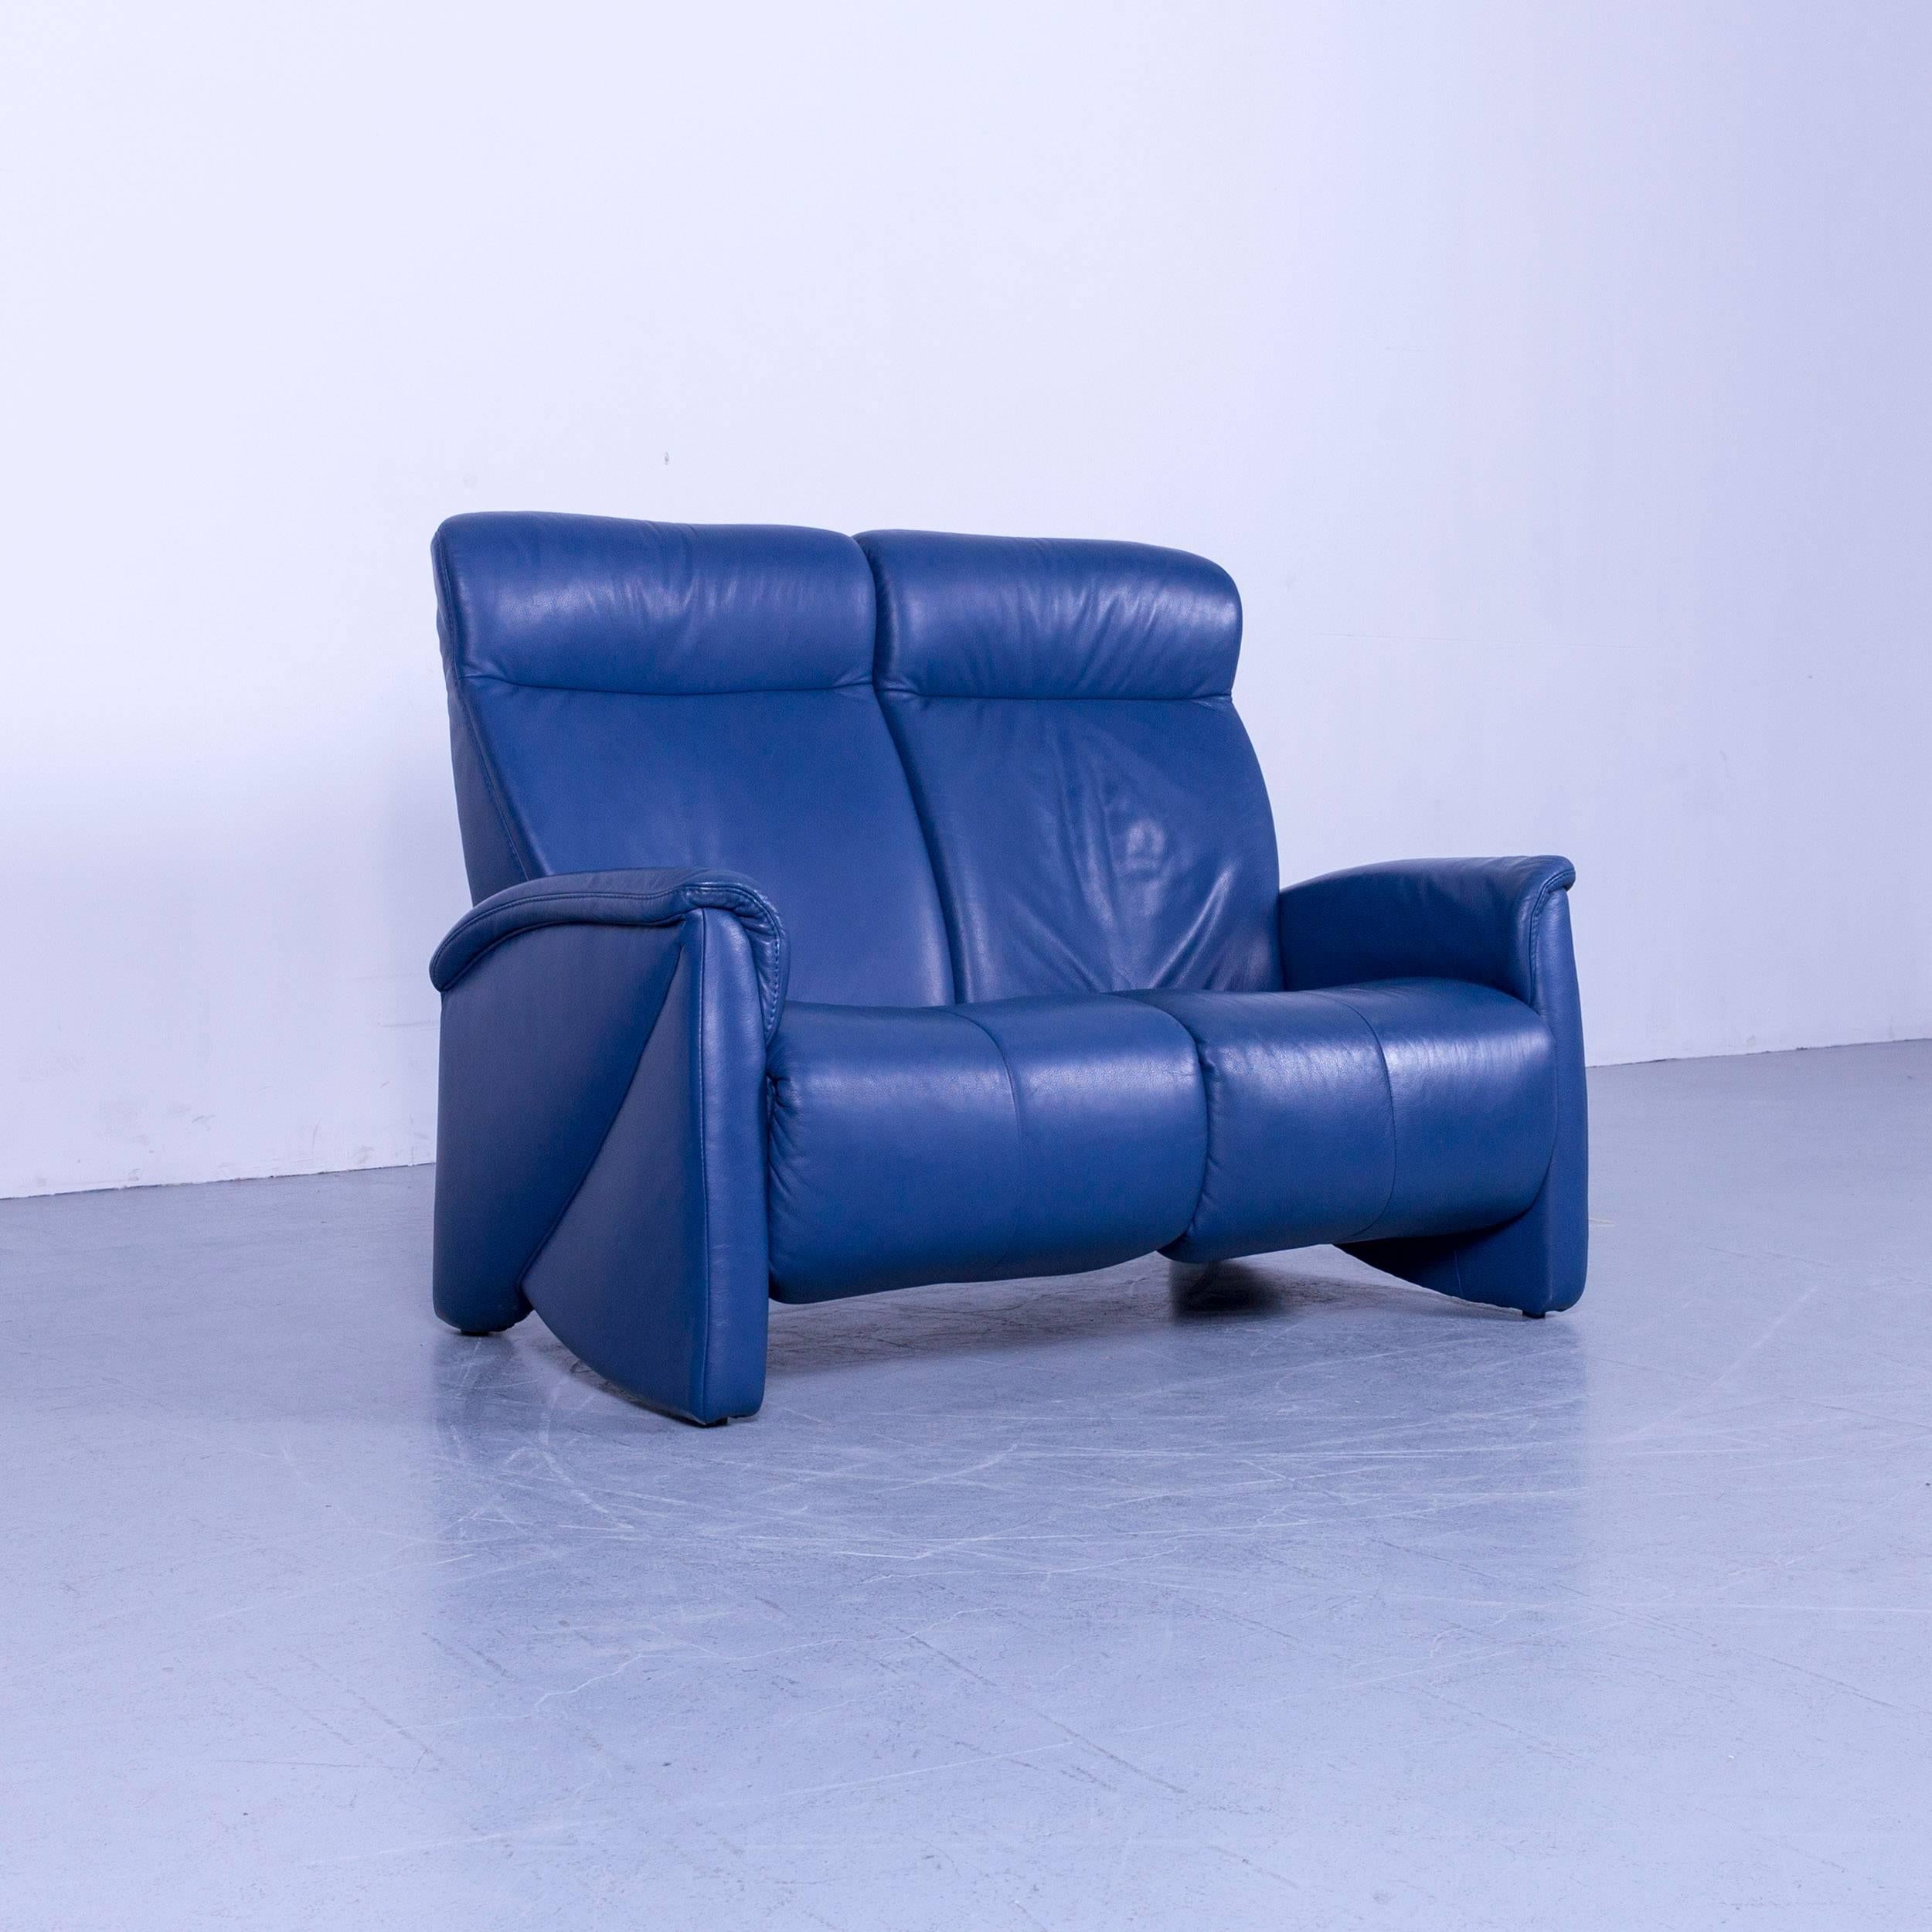 blue leather sofa recliner